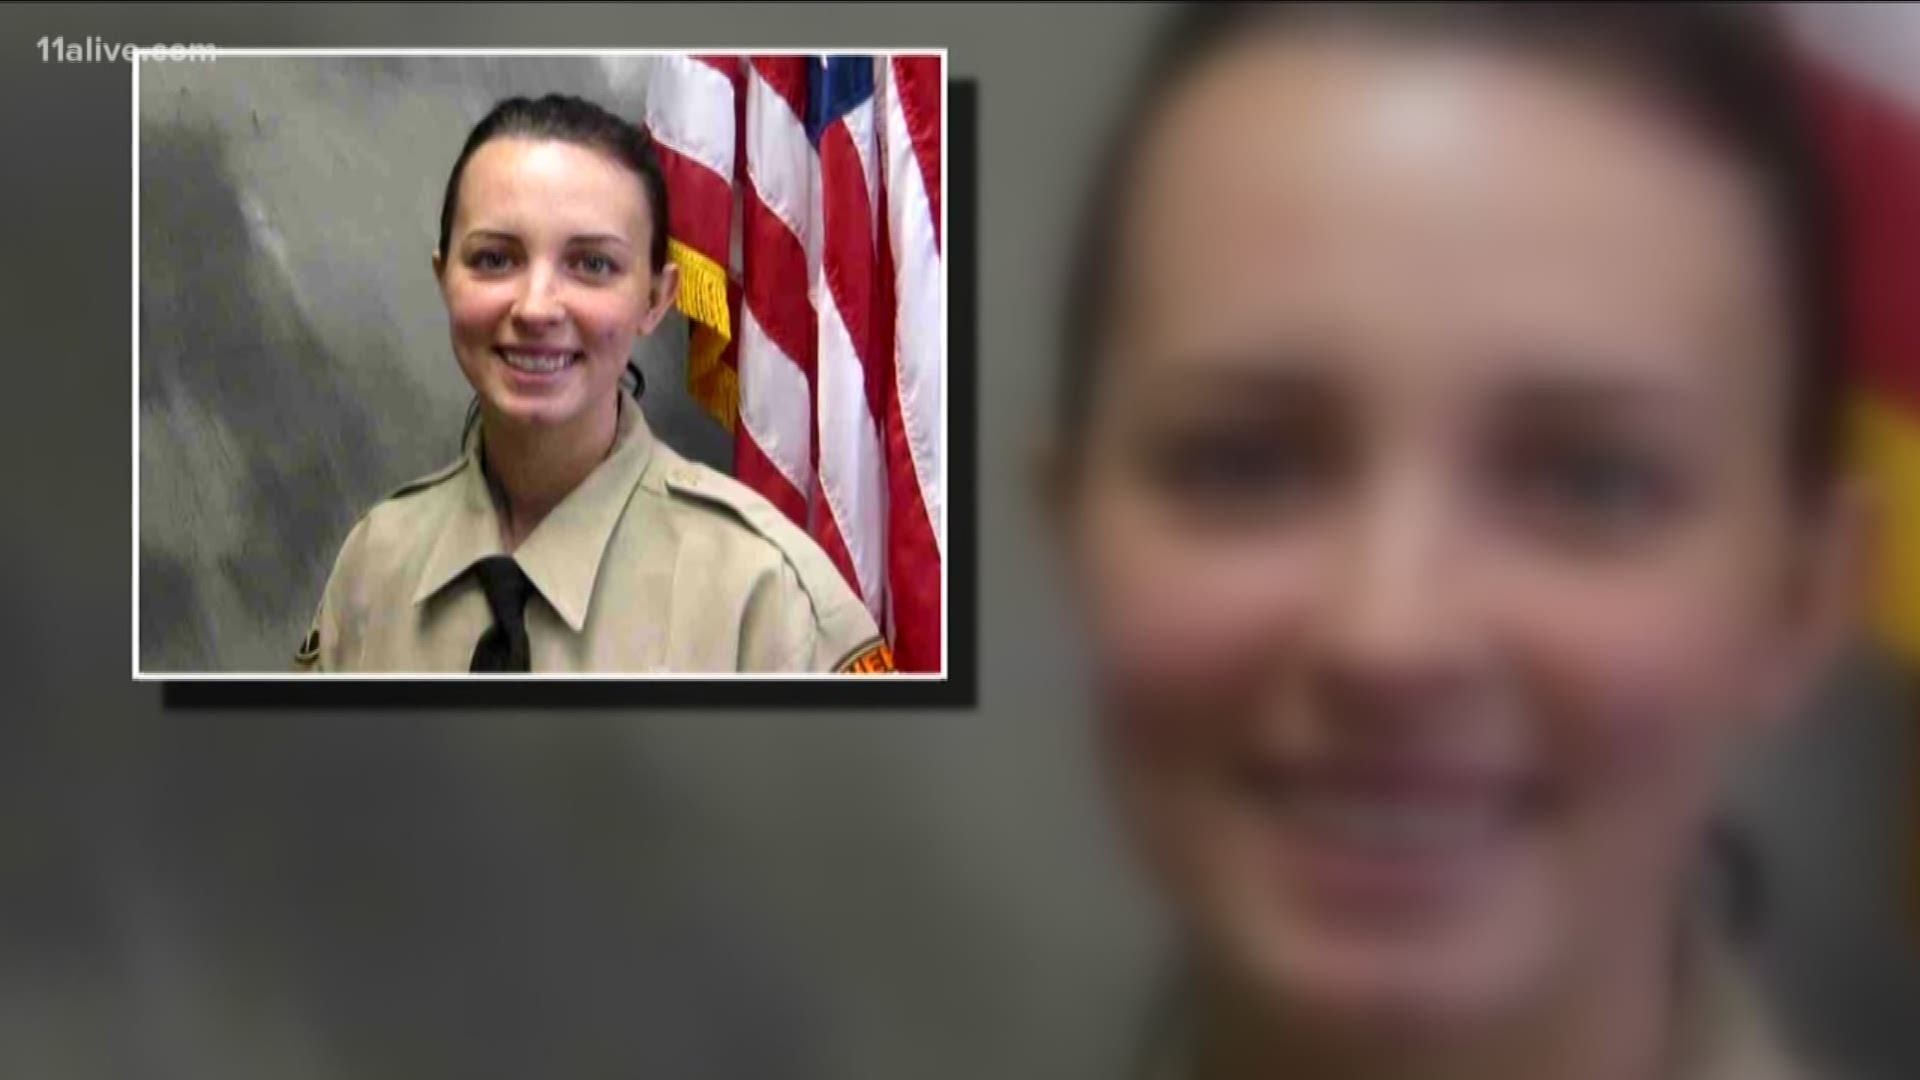 Pickens County Deputy Cassie Defoor is only 30 years old and has been part of the Uniform Patrol Division for the past two years. Now, she's in the battle of her life.